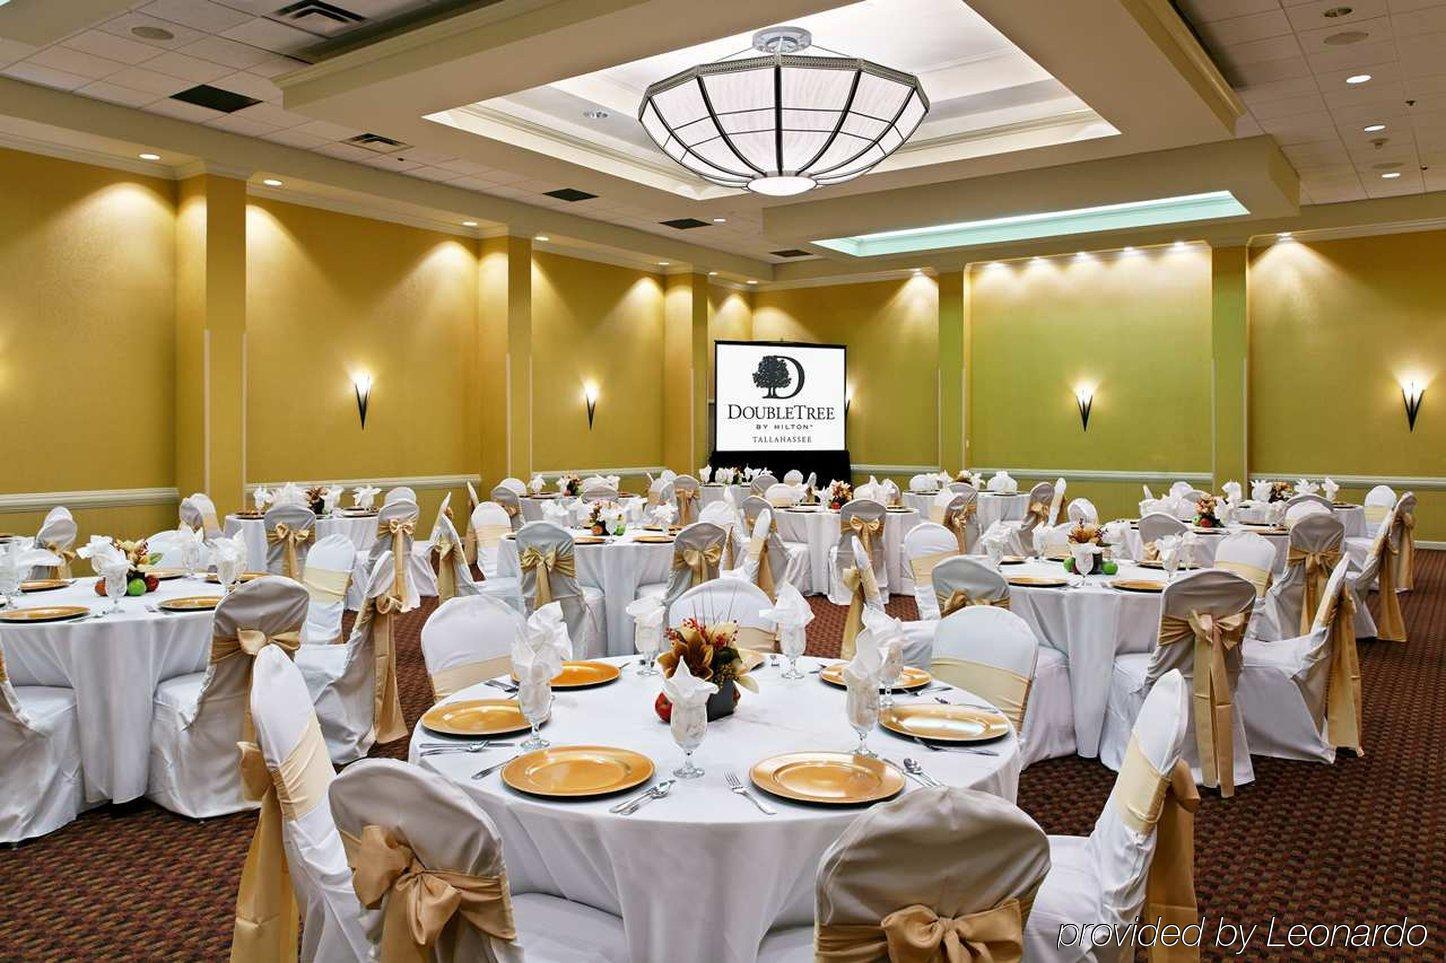 Doubletree By Hilton Hotel Tallahassee Restaurant photo